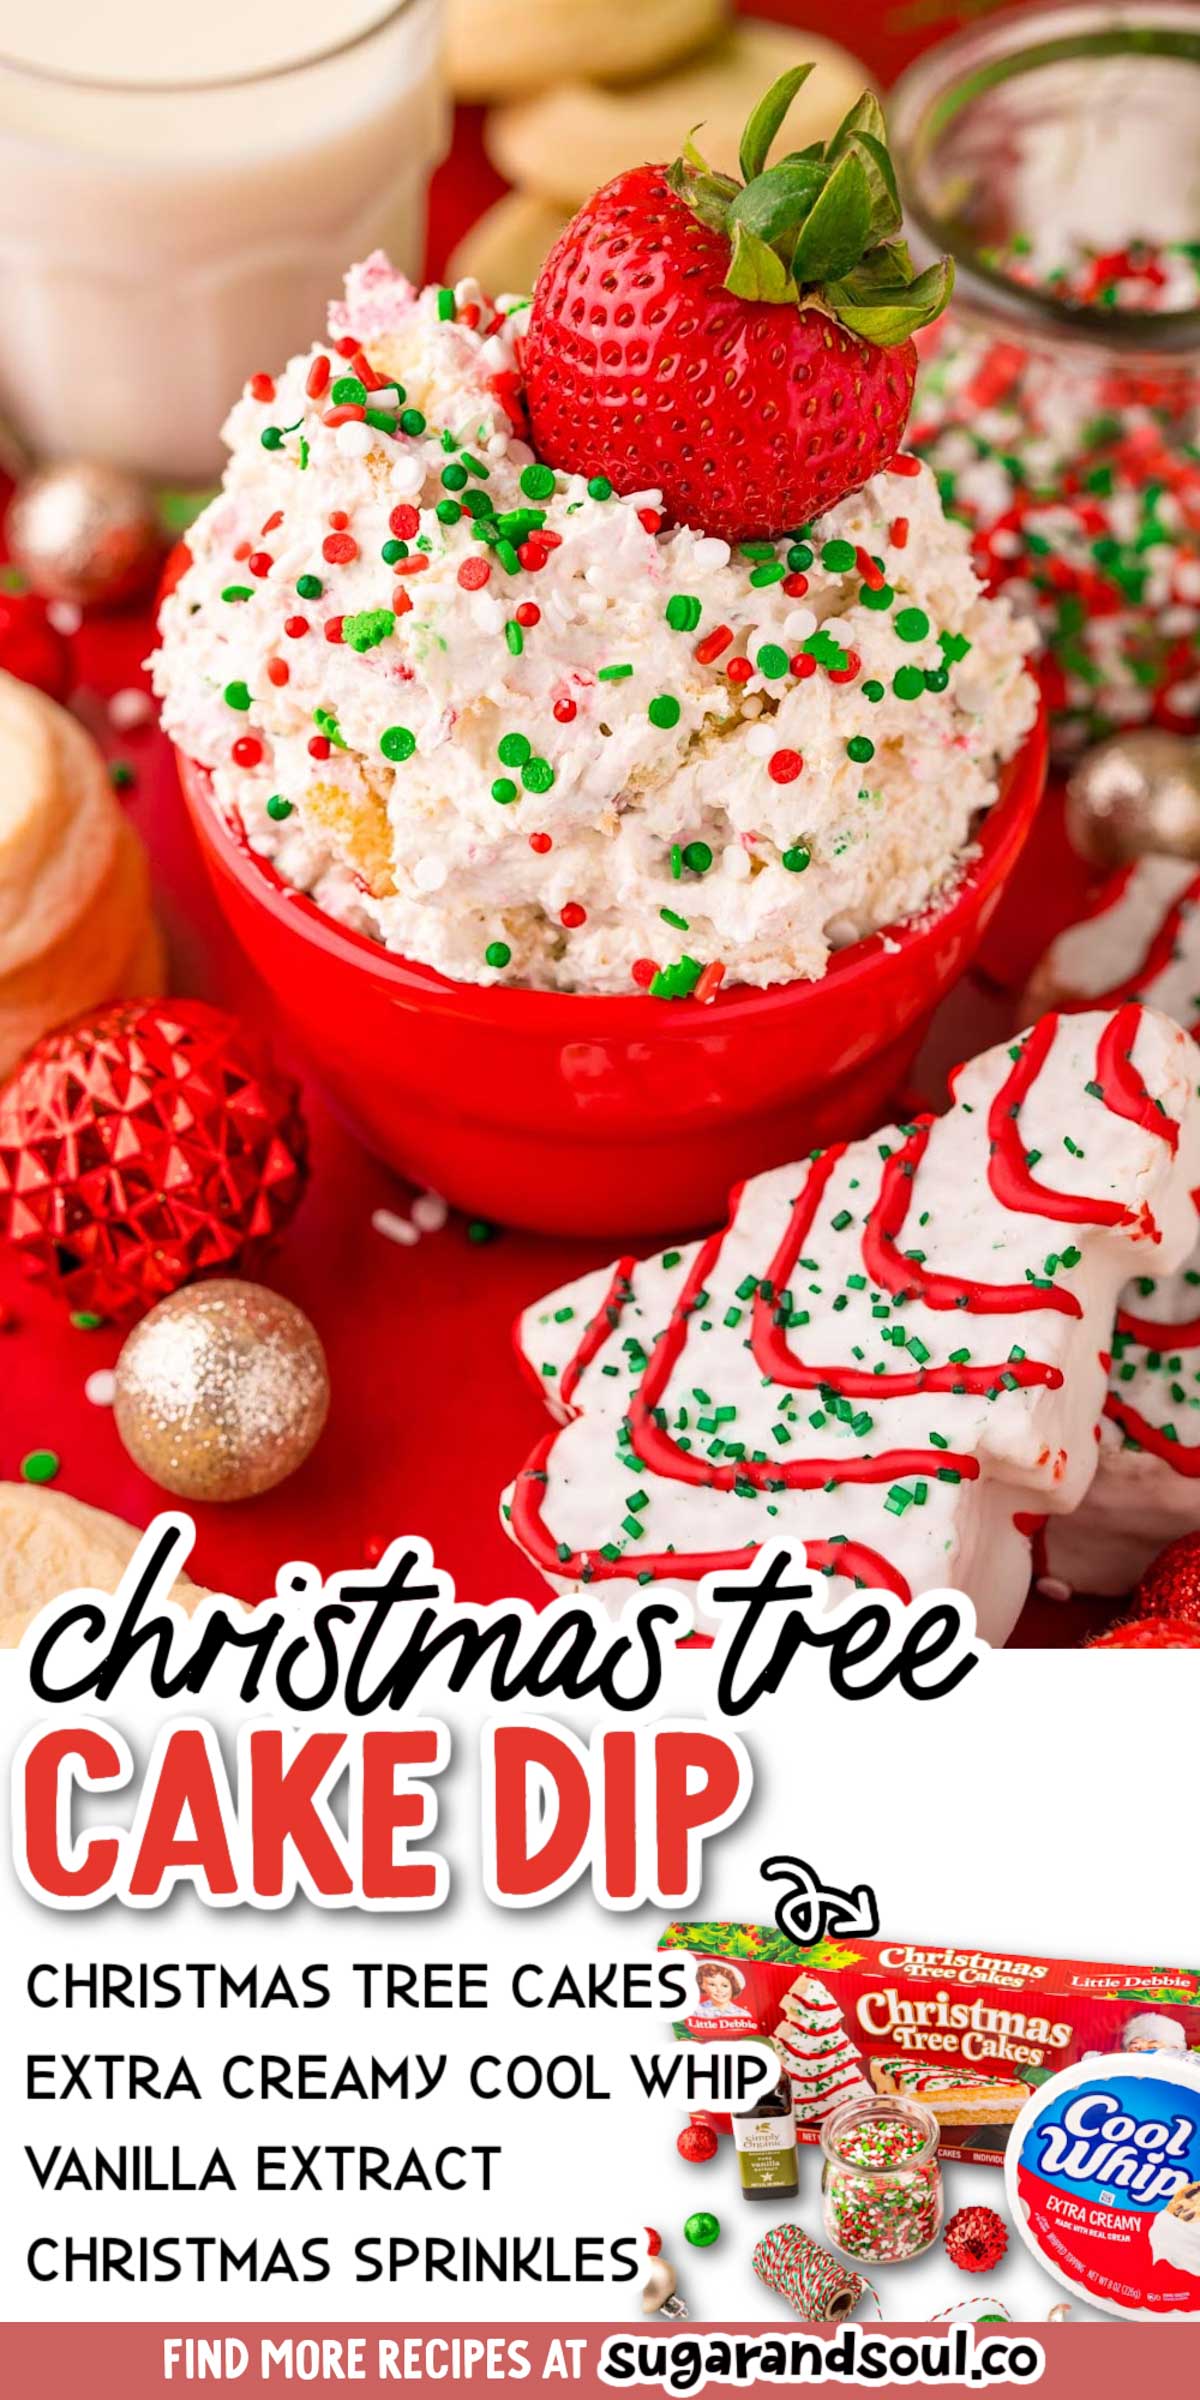 This Christmas Tree Cake Dip is an irresistible decadent dessert dip that's made with just 4 easy ingredients in only 10 minutes! A true crowd-pleasing treat that will quickly disappear when shared with friends and family! via @sugarandsoulco